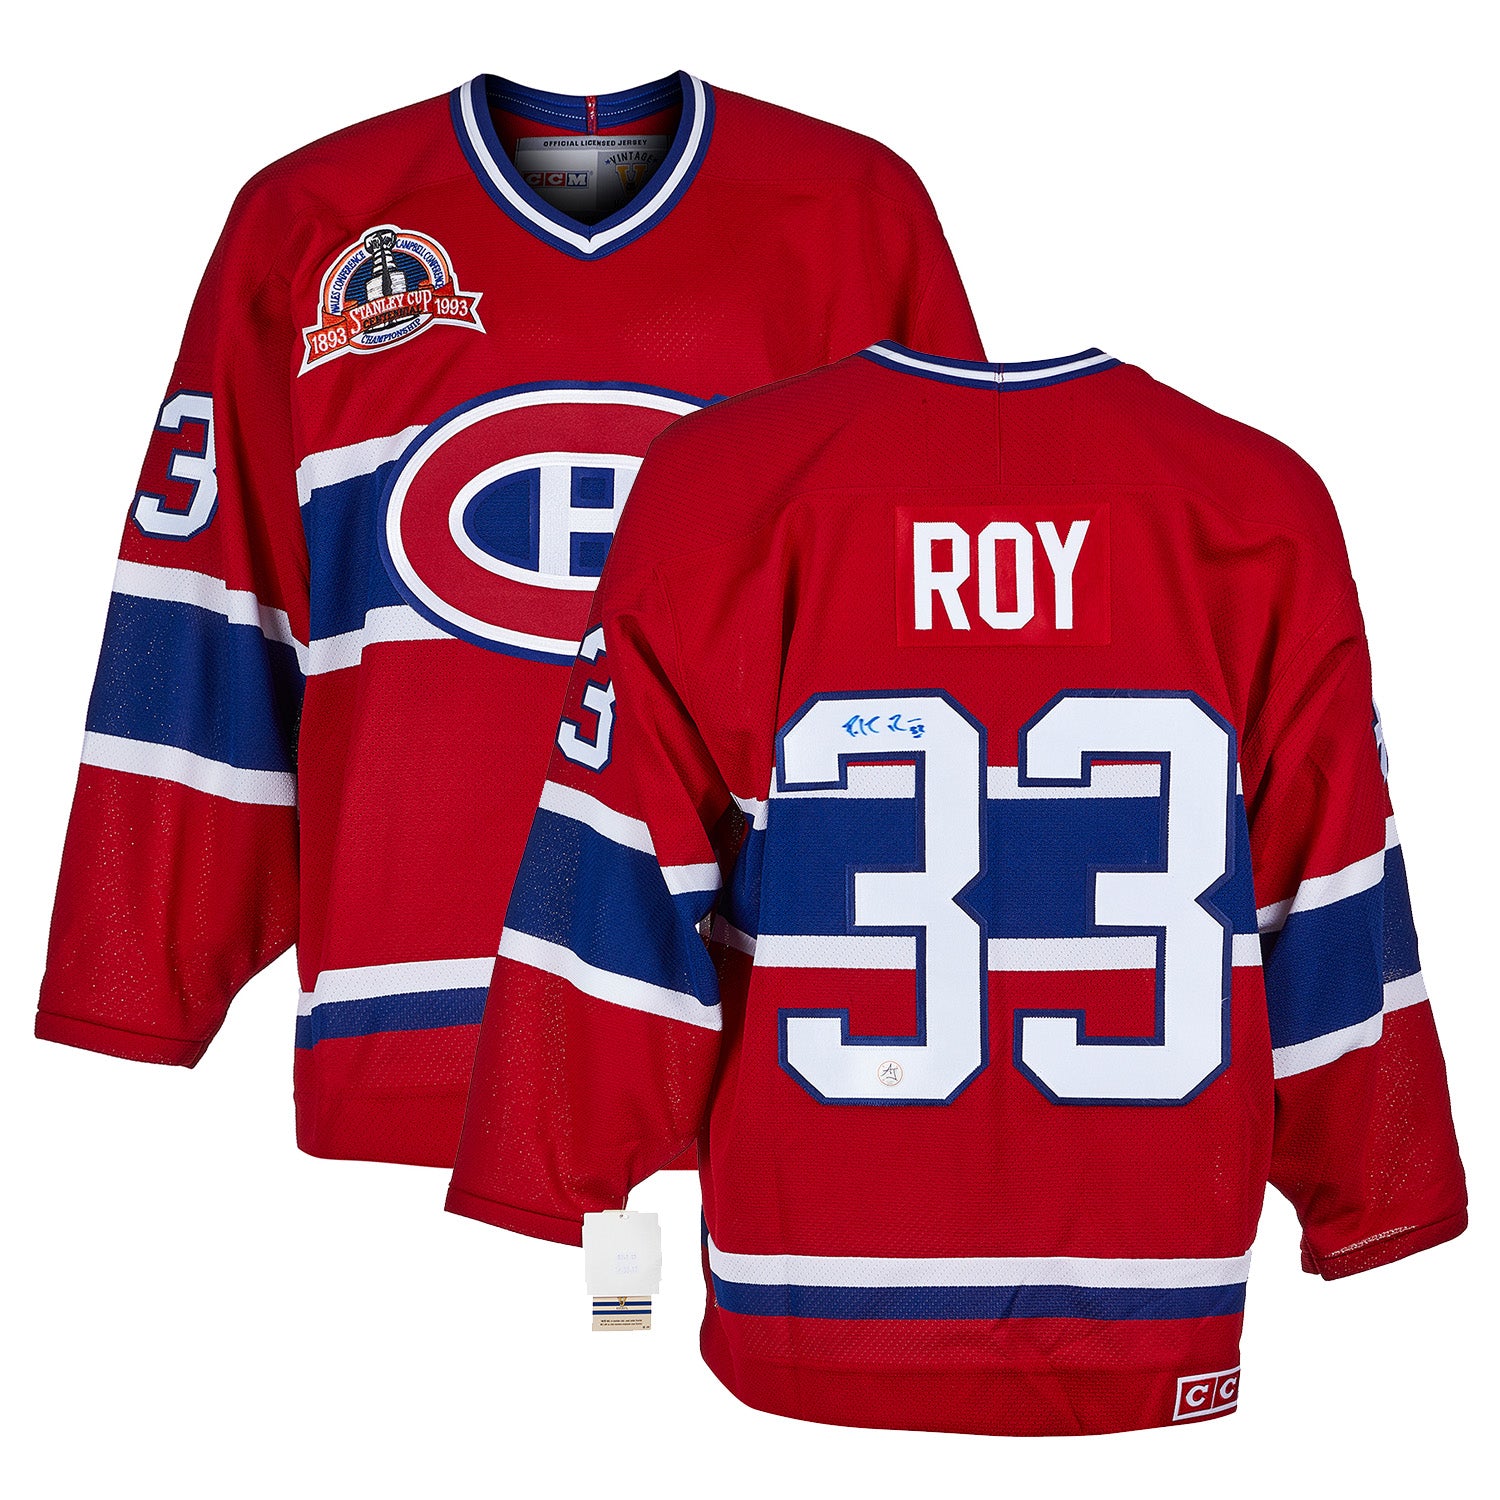 Patrick Roy Signed Montreal Canadiens 1993 Stanley Cup CCM Vintage Jersey